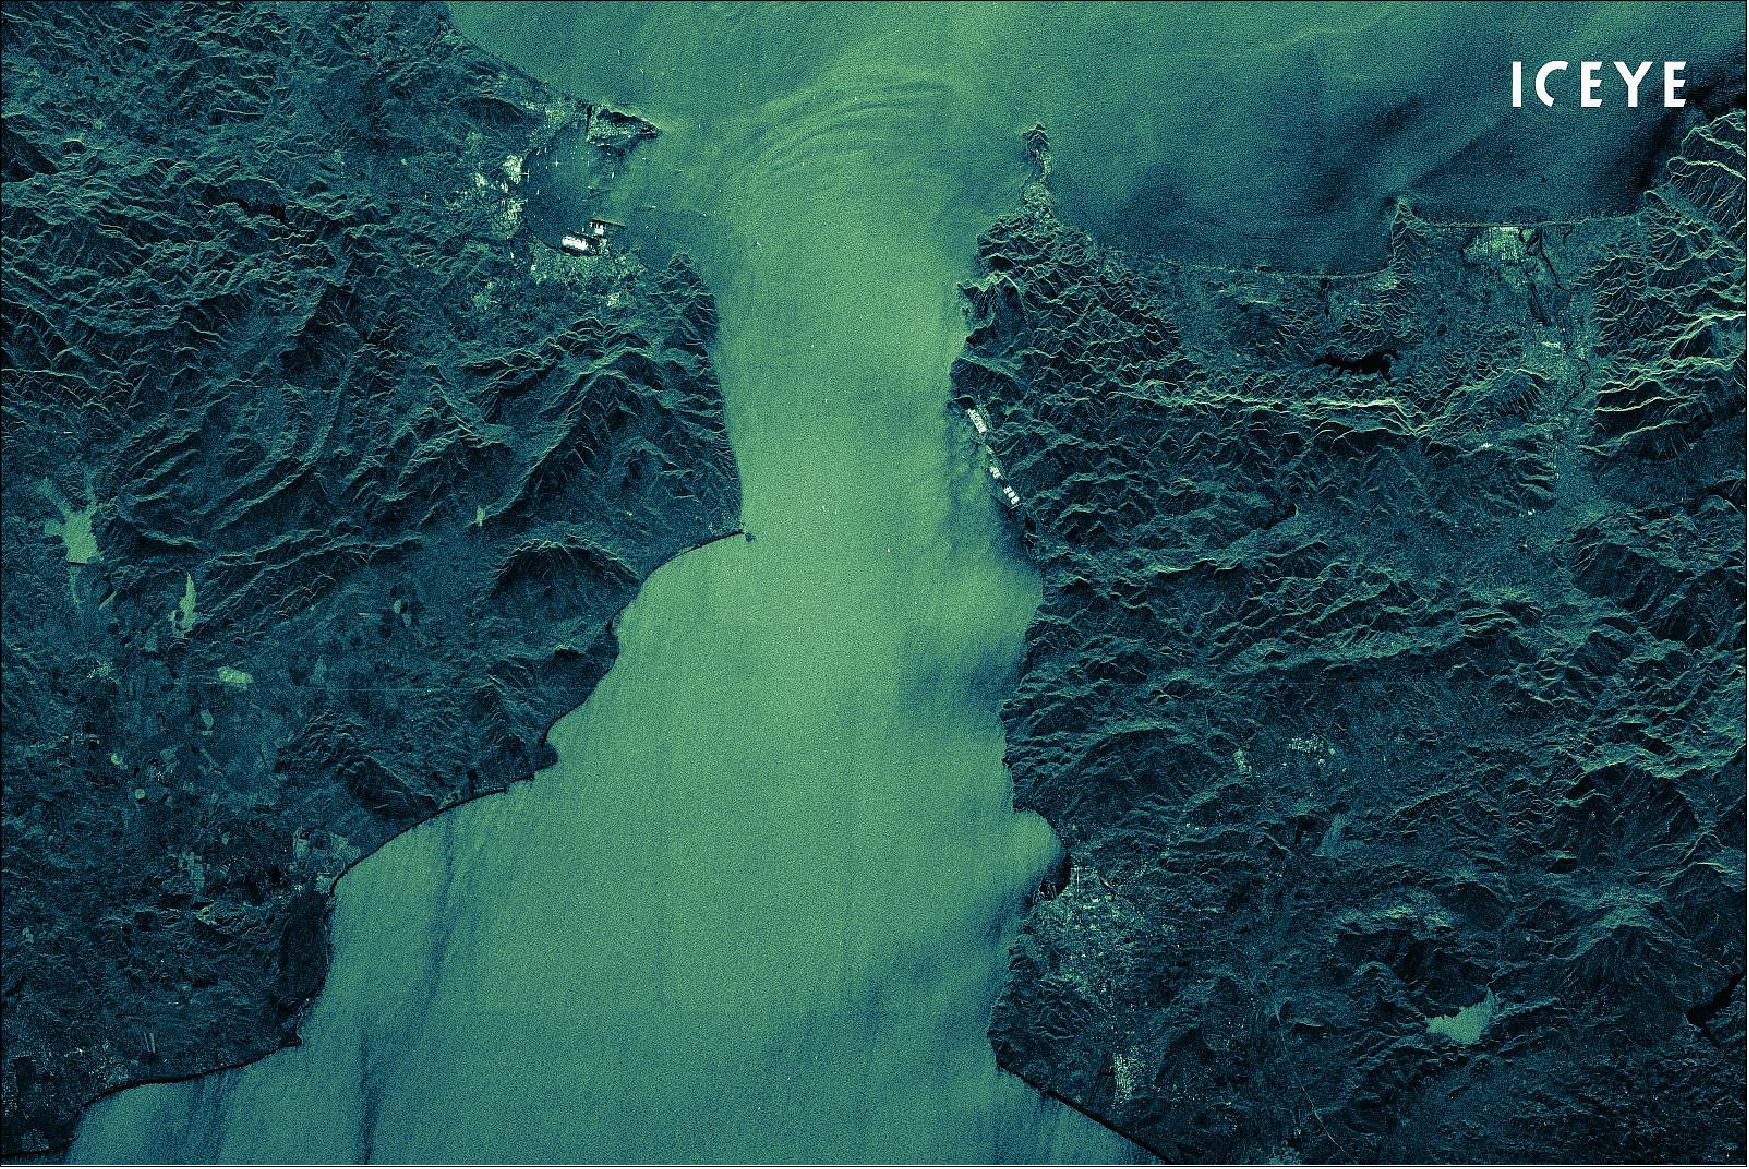 Figure 28: A wide area ICEYE radar satellite image of the Strait of Gibraltar (image credit: ICEYE)